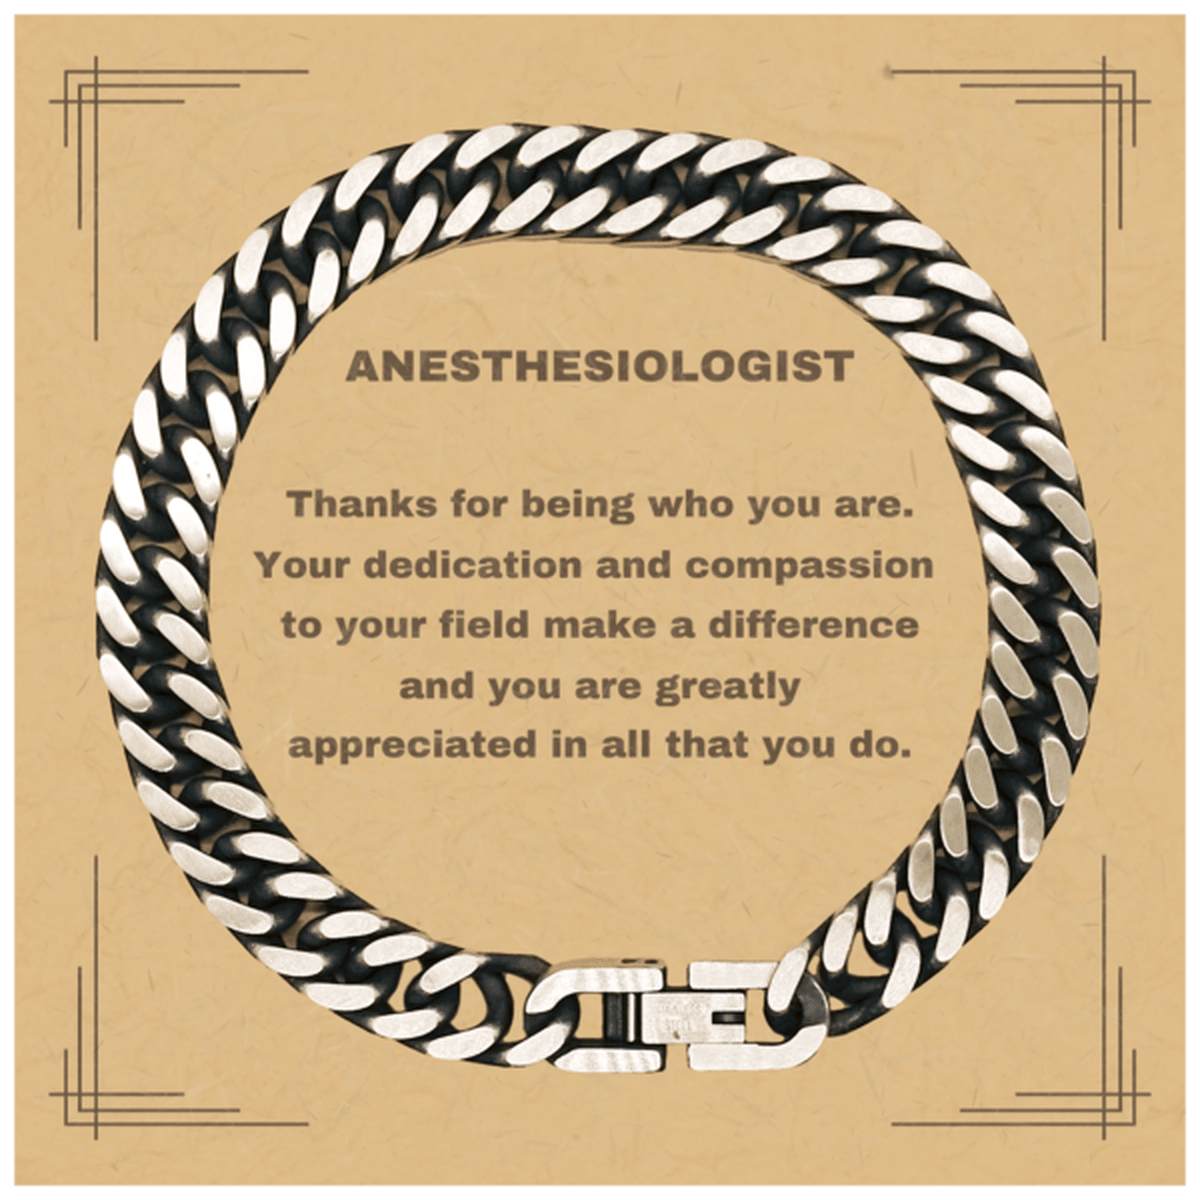 Anesthesiologist Cuban Link Chain Bracelet - Thanks for being who you are - Birthday Christmas Jewelry Gifts Coworkers Colleague Boss - Mallard Moon Gift Shop